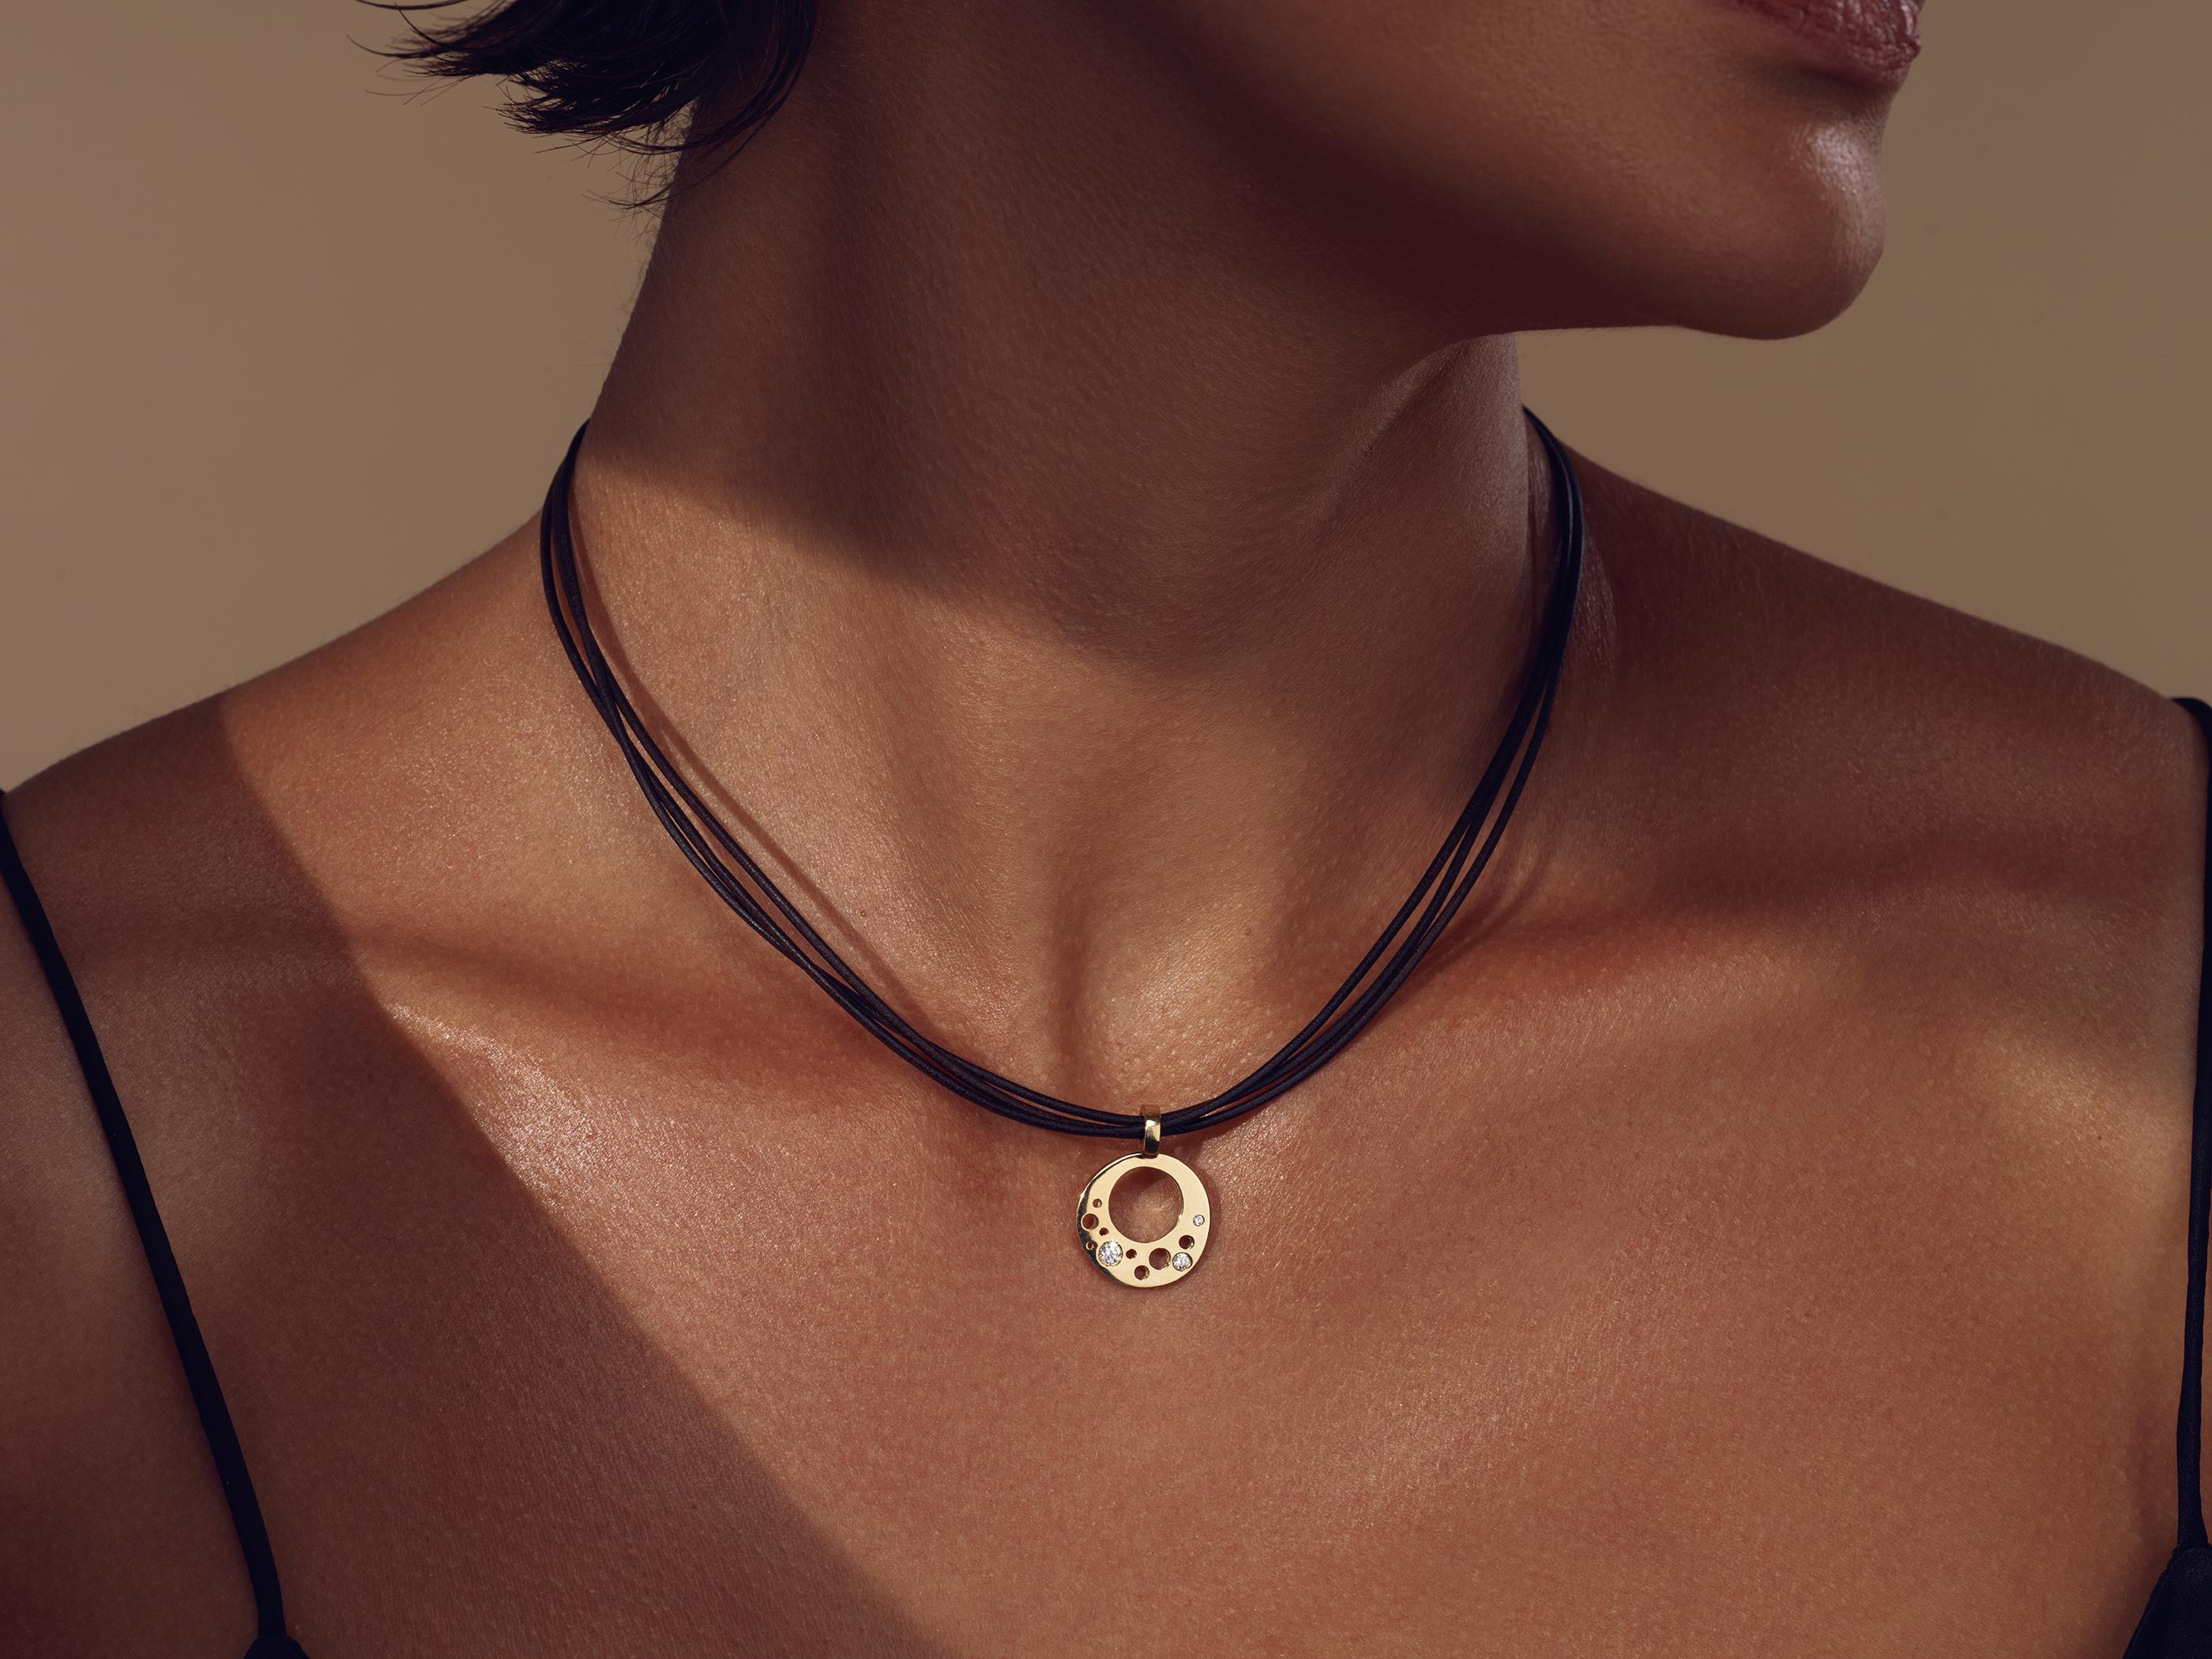 Crafted in 18kt Certified FAIRMINED Yellow Gold, and post-consumer recycled mined diamonds, the CIRCLE_INFINITE Pendant tells its own story of 'Less is More' when it comes to beauty and sophistication. 
Minimalism and functionality blend industrial